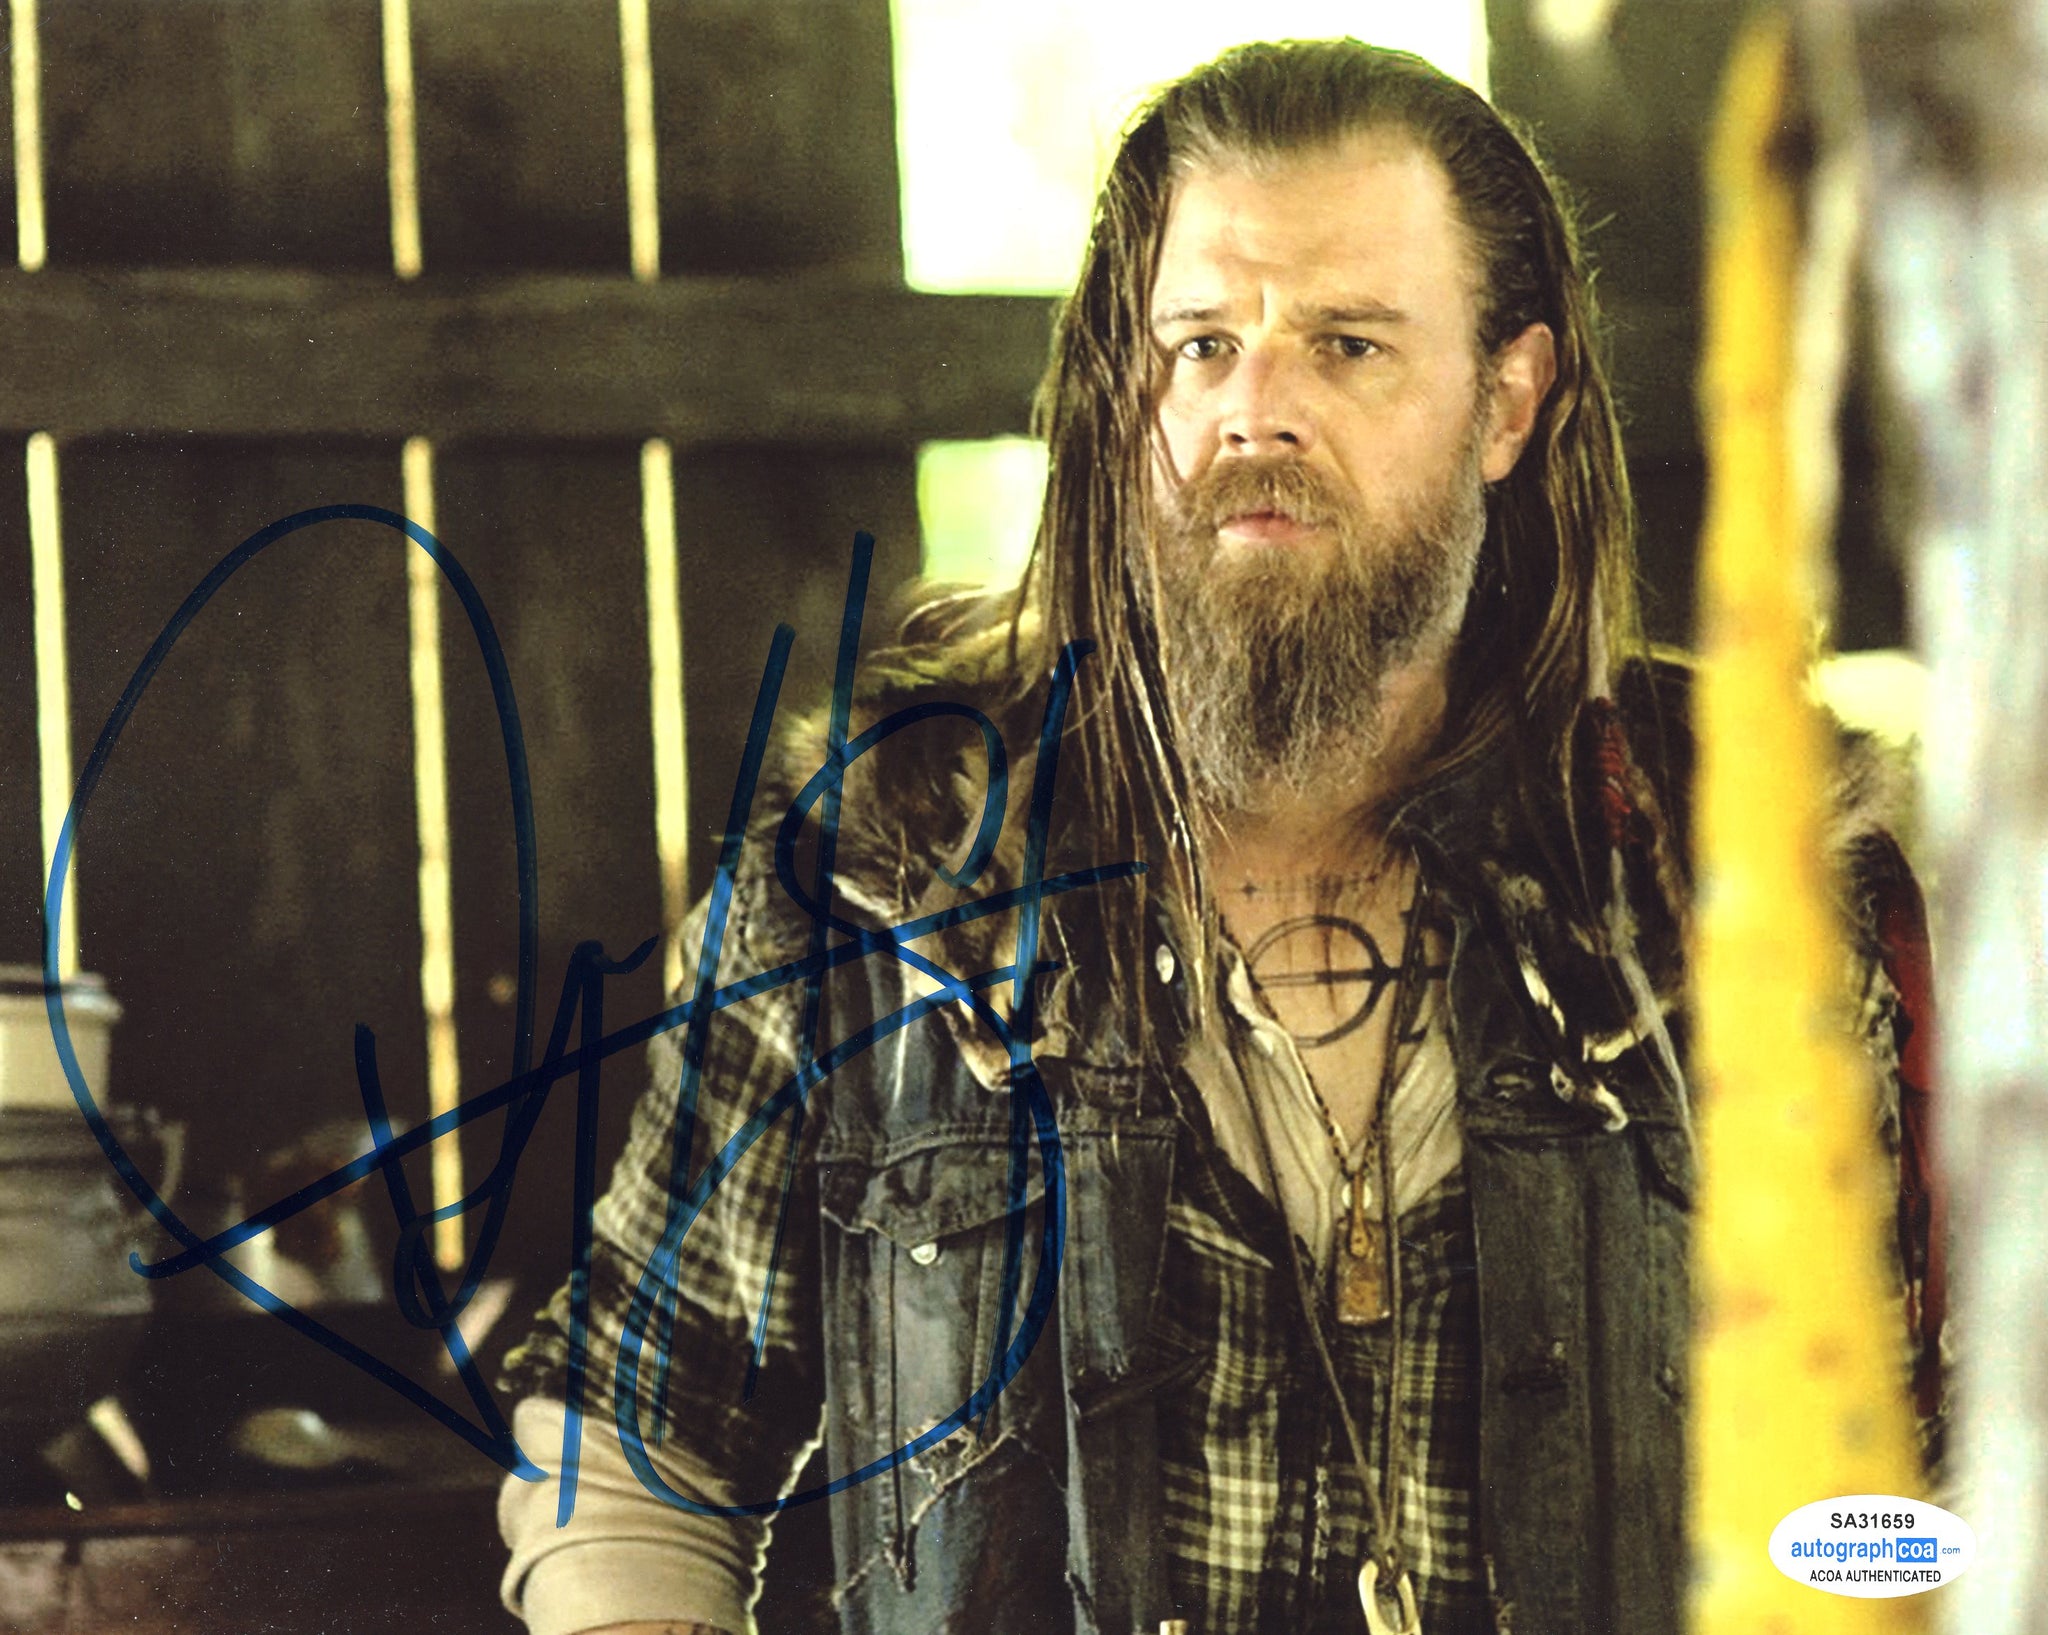 Ryan Hurst Outsiders Signed Autograph 8x10 Photo #14 - Outlaw Hobbies Authentic Autographs